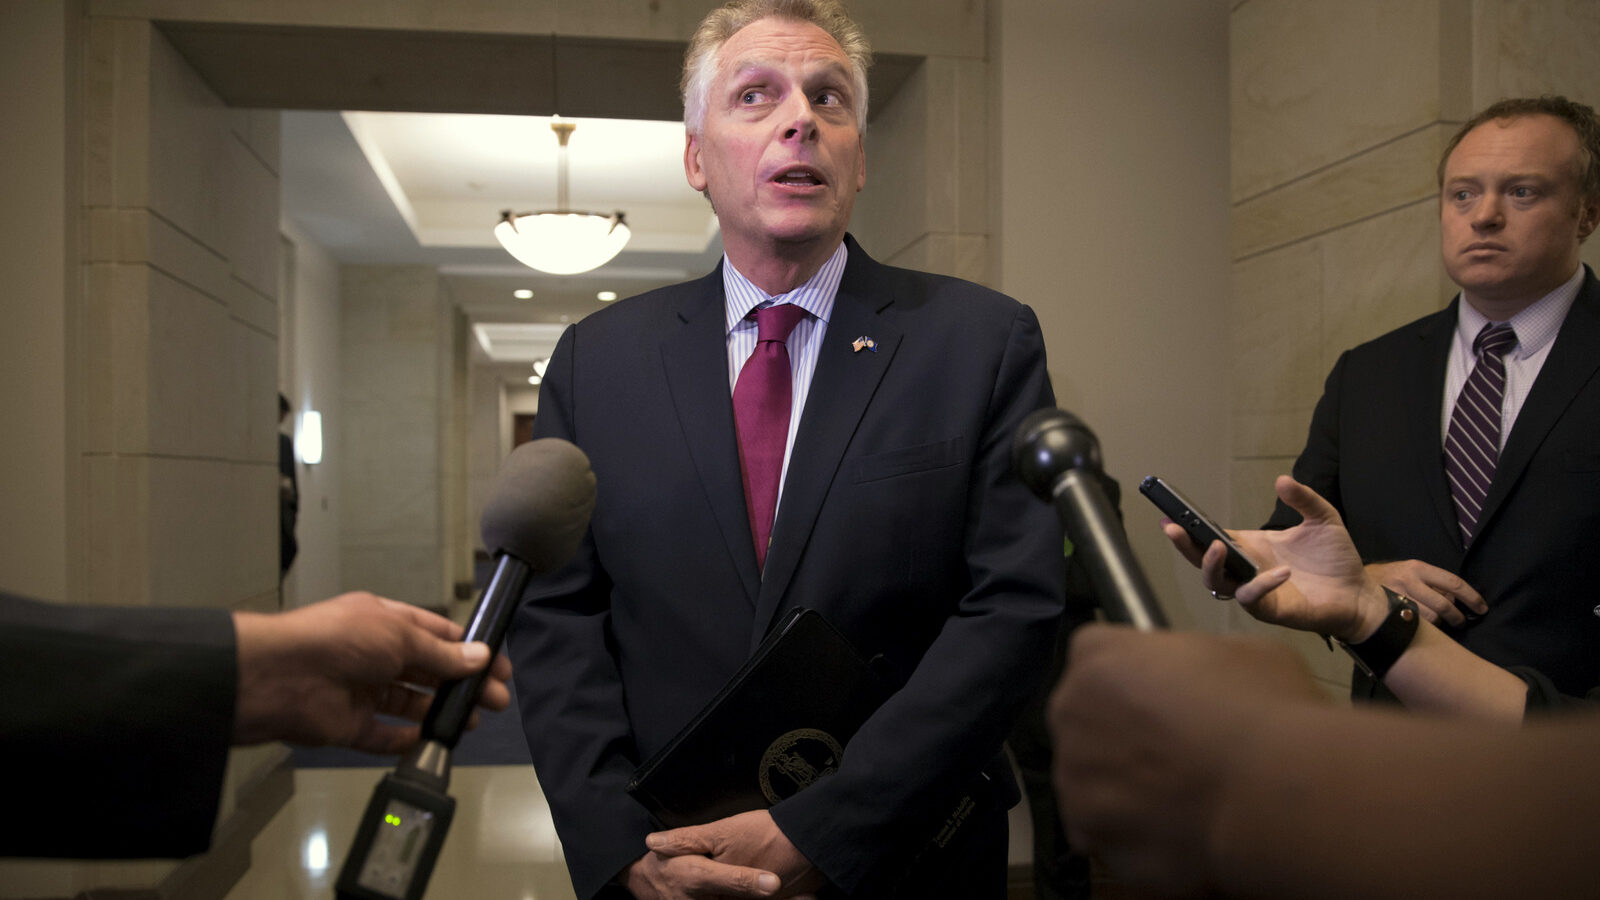 Virginia Gov. Terry McAuliffe speaks with reporters on Capitol Hill in Washington. McAuliffe helped fund the failed state Senate campaign of the FBI official’s wife who later go on to clear investigate Hillary Clinton's use of a private email server.